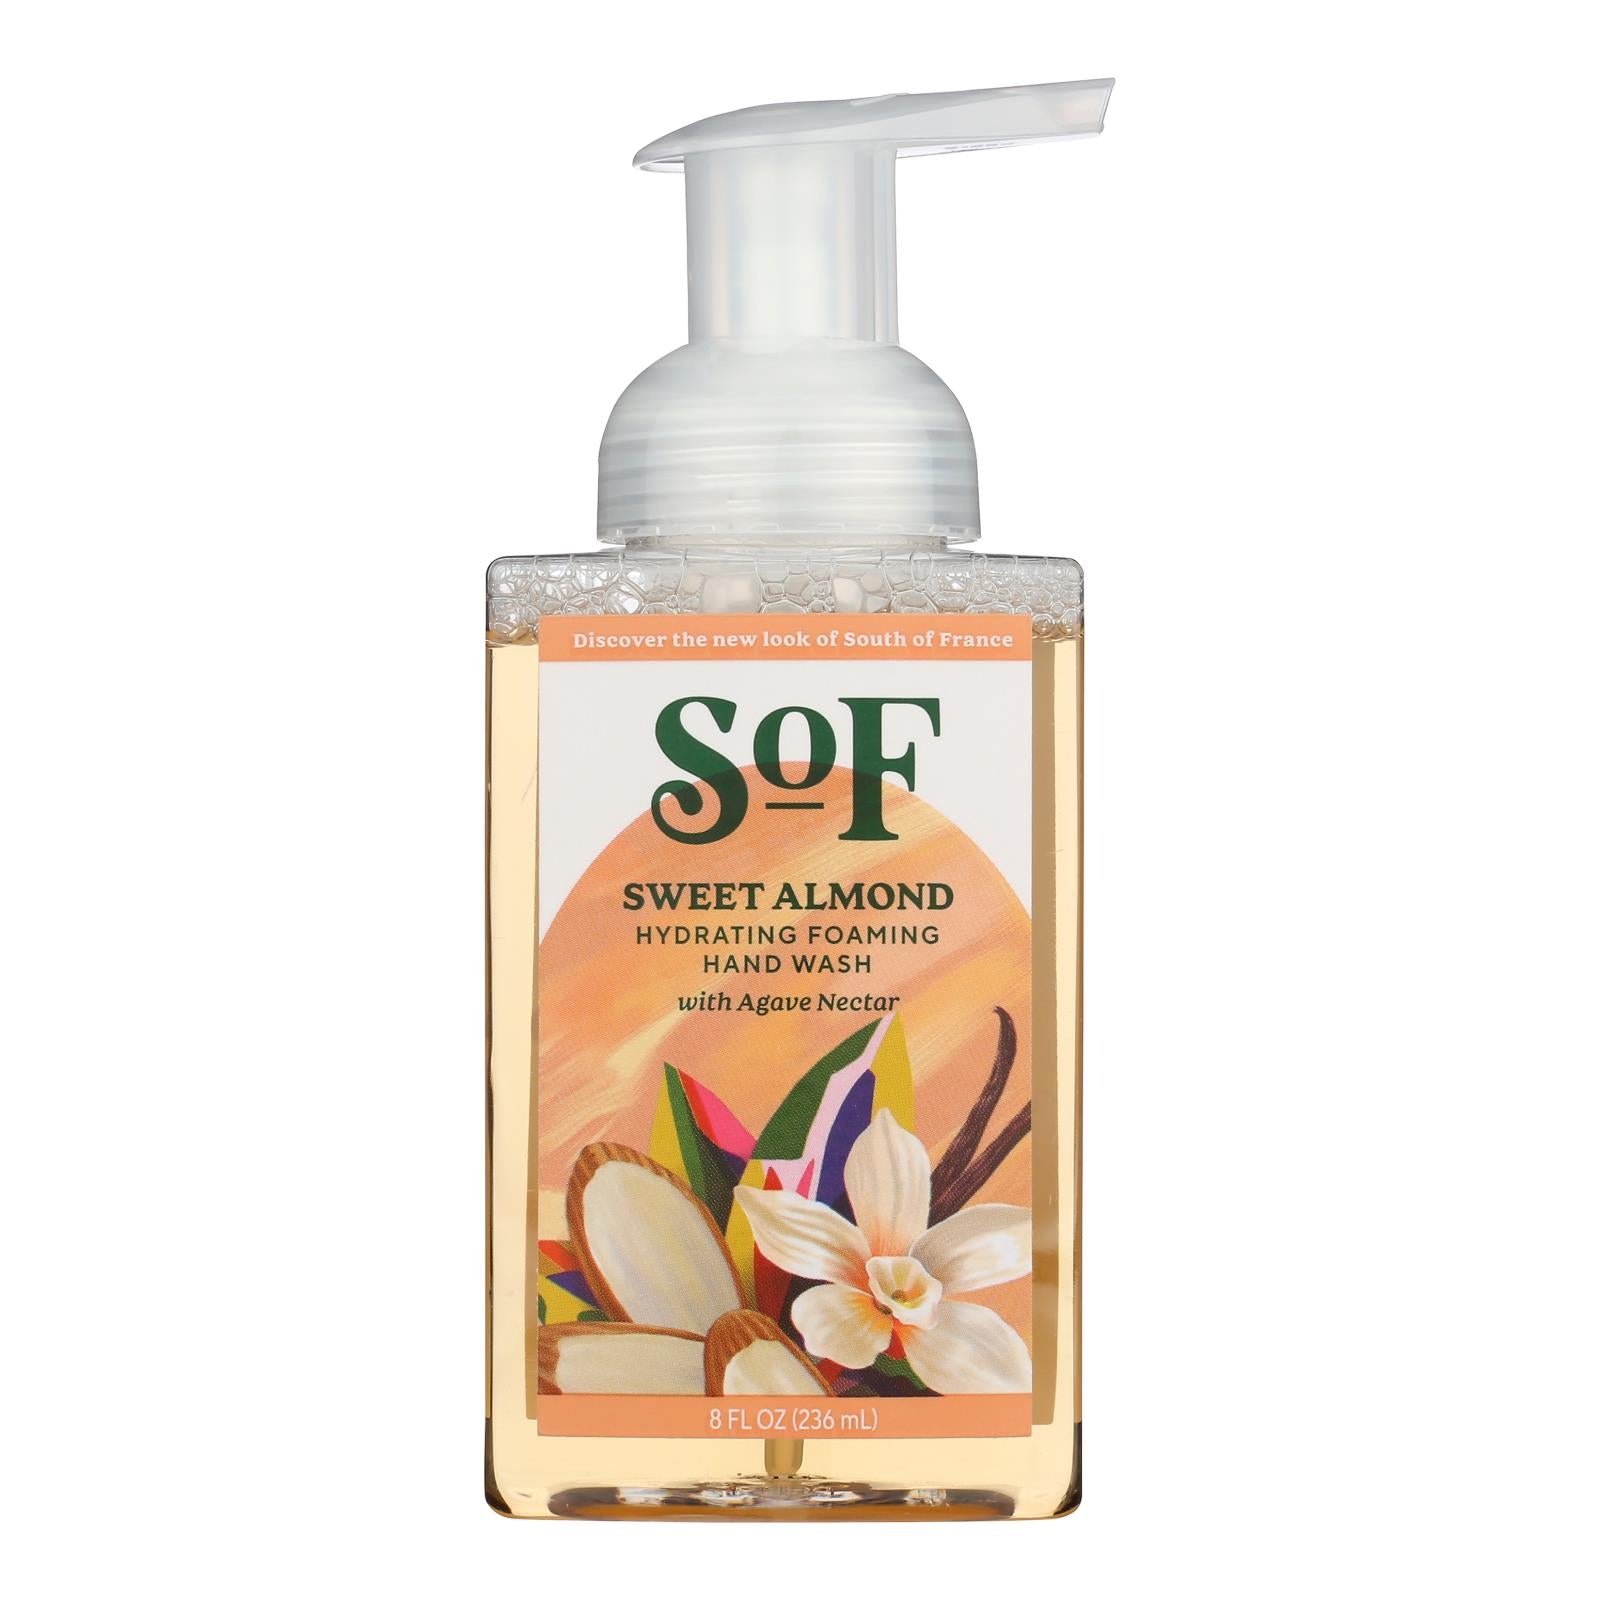 South Of France Hand Soap - Foaming - Almond Gourmande - 8 Oz - 1 Each